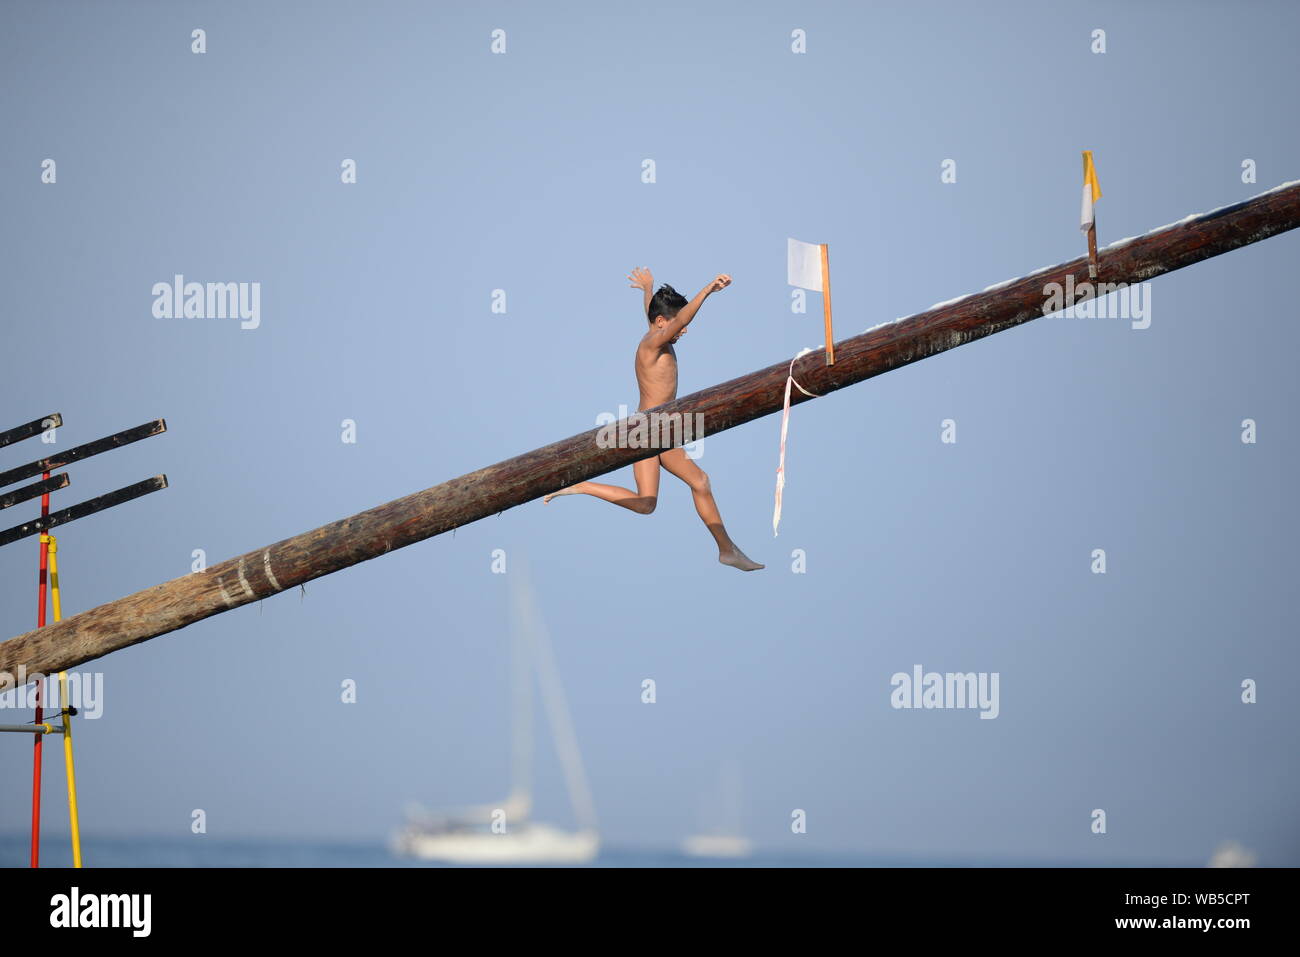 A participant during the greasy pole ('Ġostra' in Maltese) event at the village feast in St Julians, Malta Stock Photo